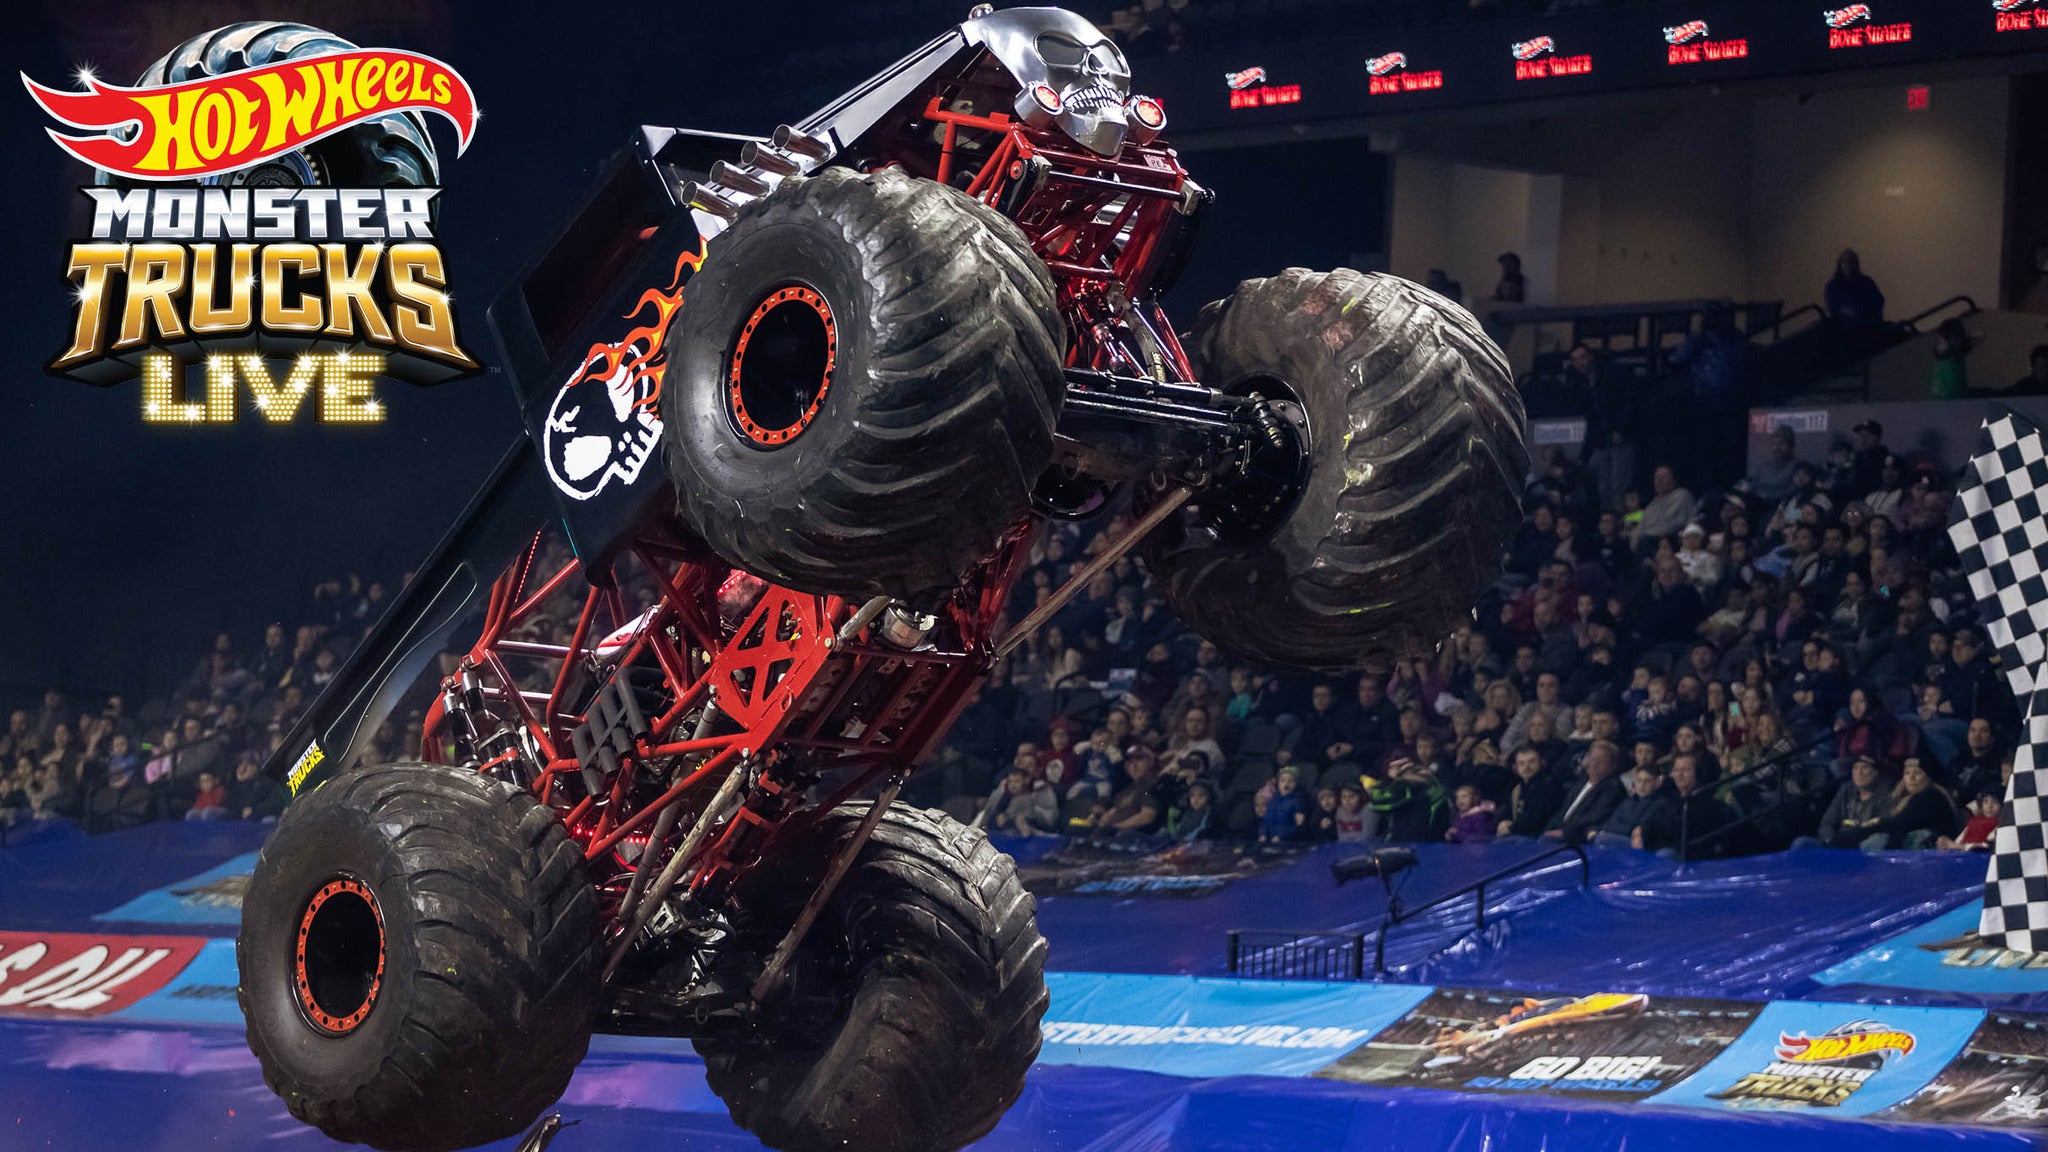 Hot Wheels Monster Trucks Live tickets, presale info and more Box